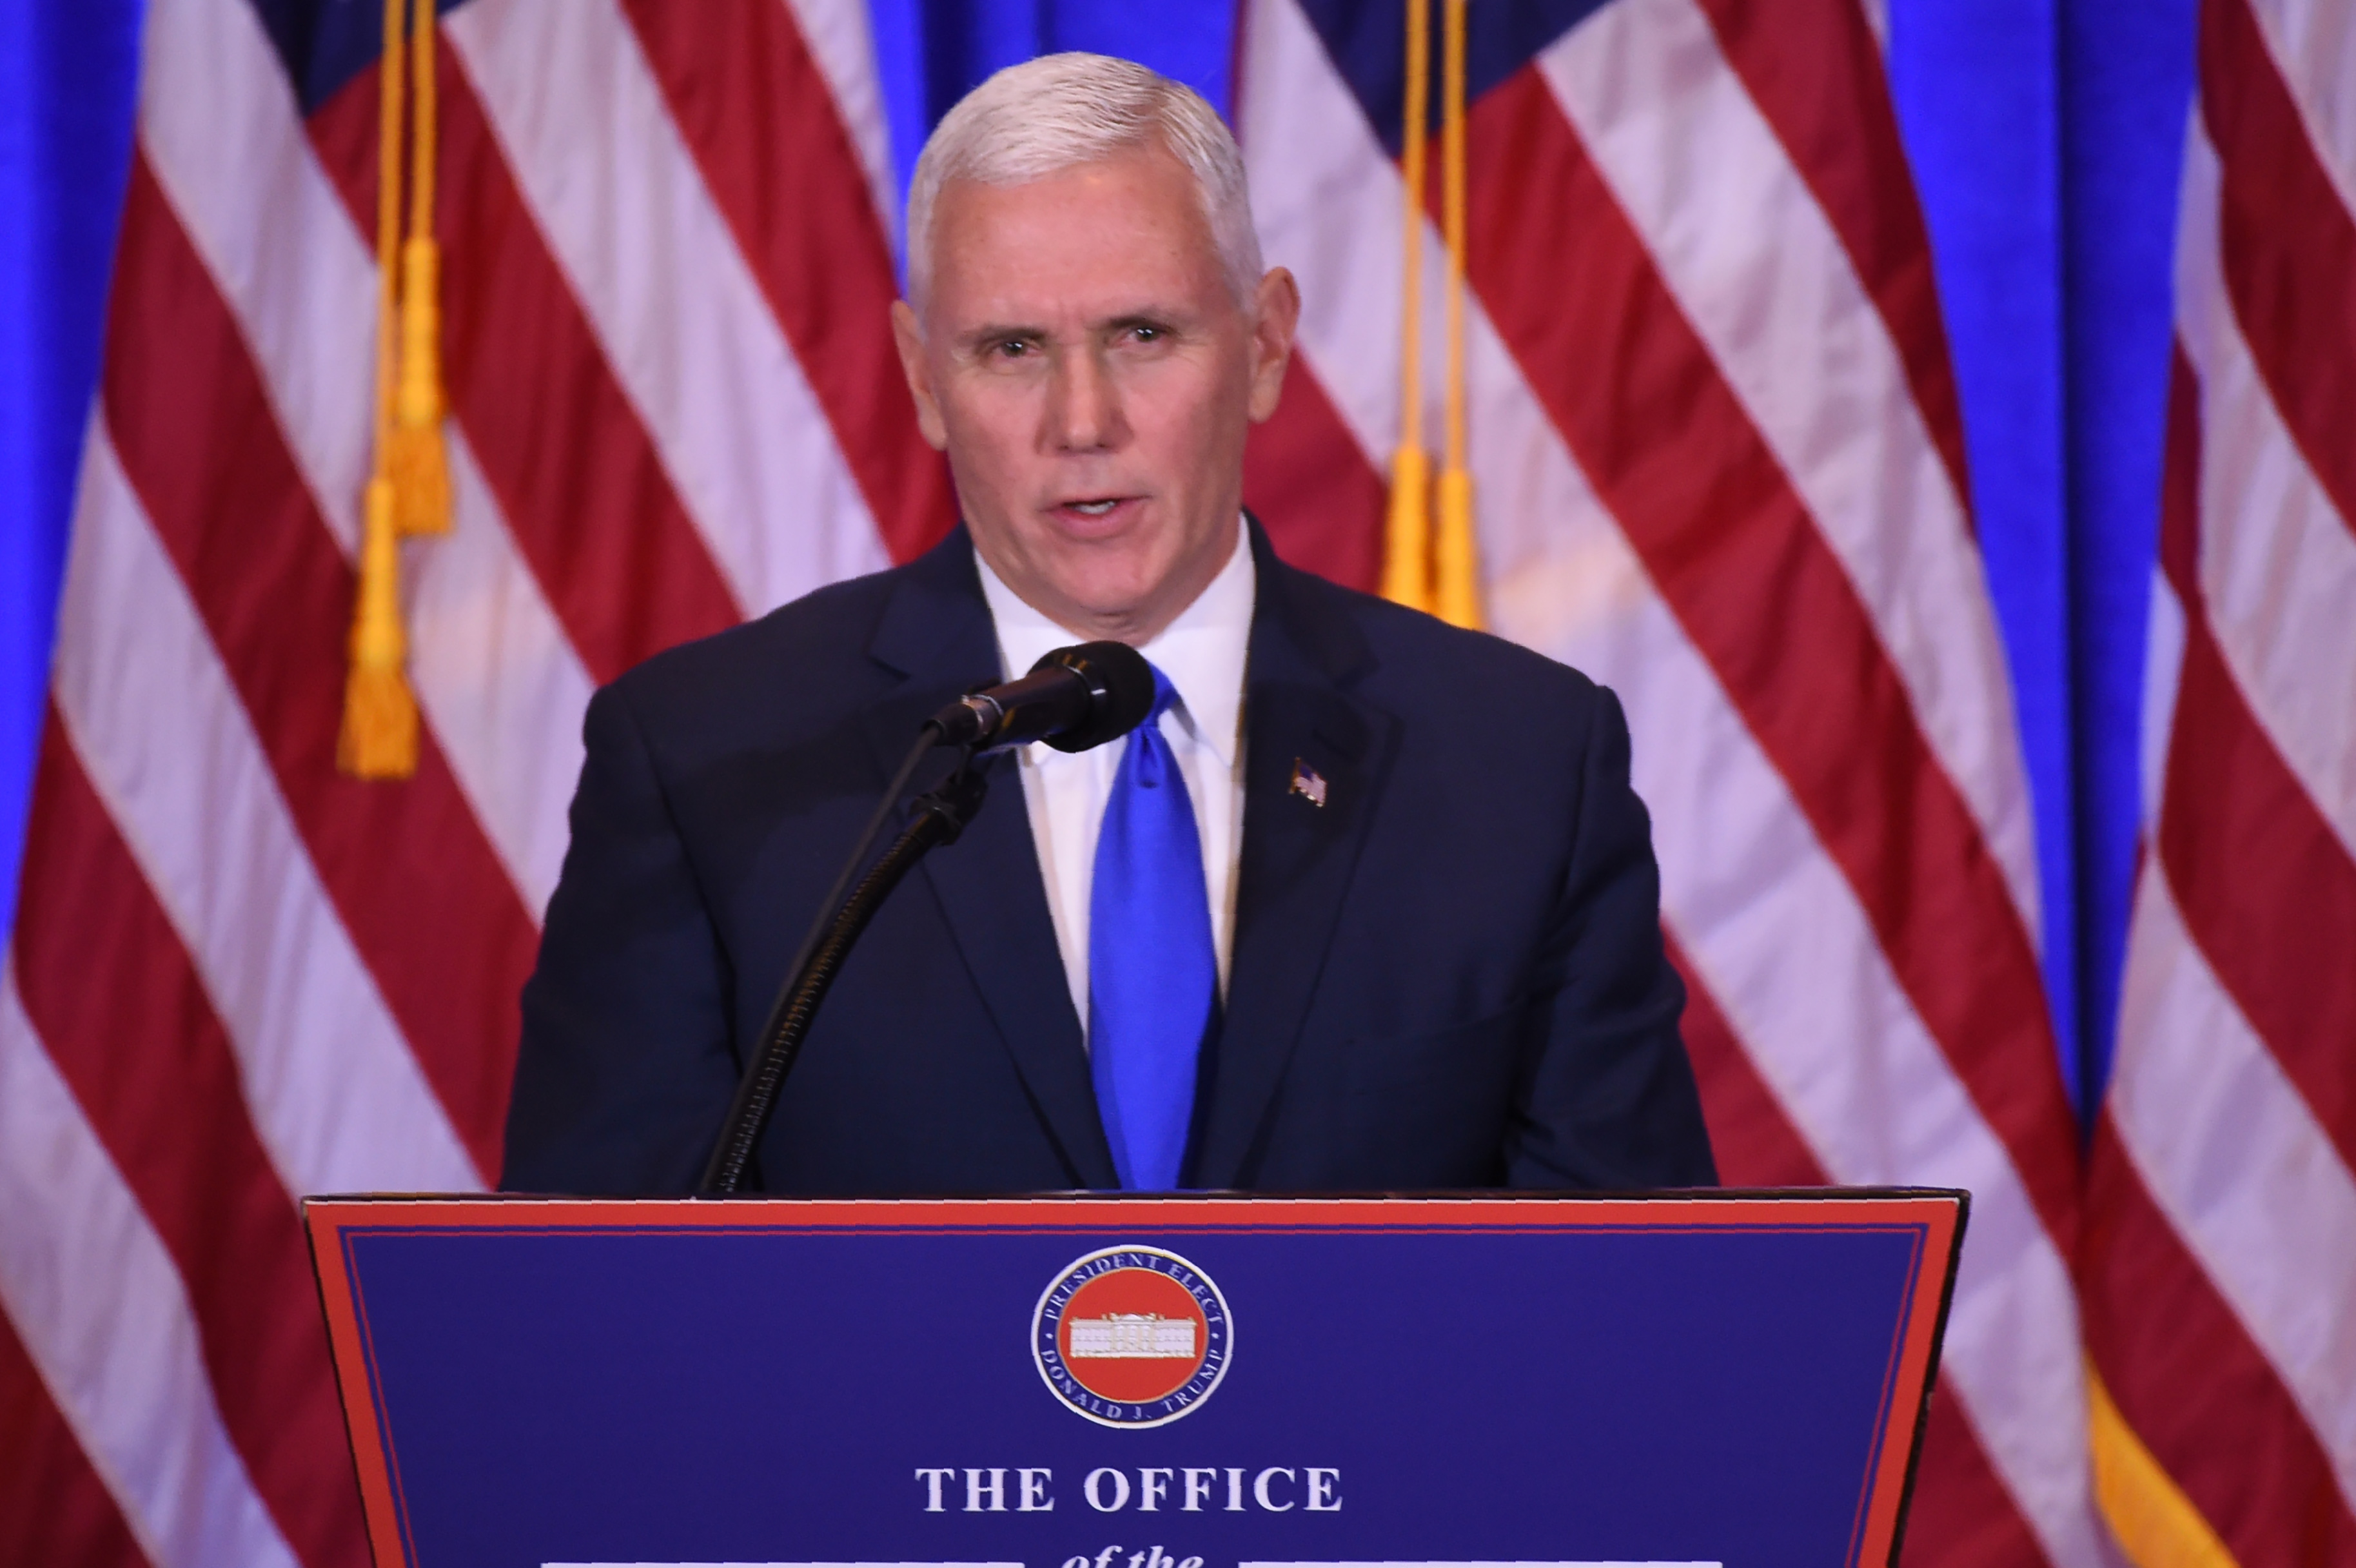 (FILES) This file photo taken on January 11, 2017 shows US Vice President-elect Mike Pence speaks during a press conference January 11, 2017 in New York. A feud between Donald Trump and a prominent civil rights icon ramped up January 15, 2017, as Vice president-elect Mike Pence jumped to his boss's defense while a growing number of Democrats vowed to skip the upcoming inauguration. Pence said he was "deeply disappointed" in longtime Congressman John Lewis's decision to boycott Trump's inauguration. / AFP PHOTO / DON EMMERT